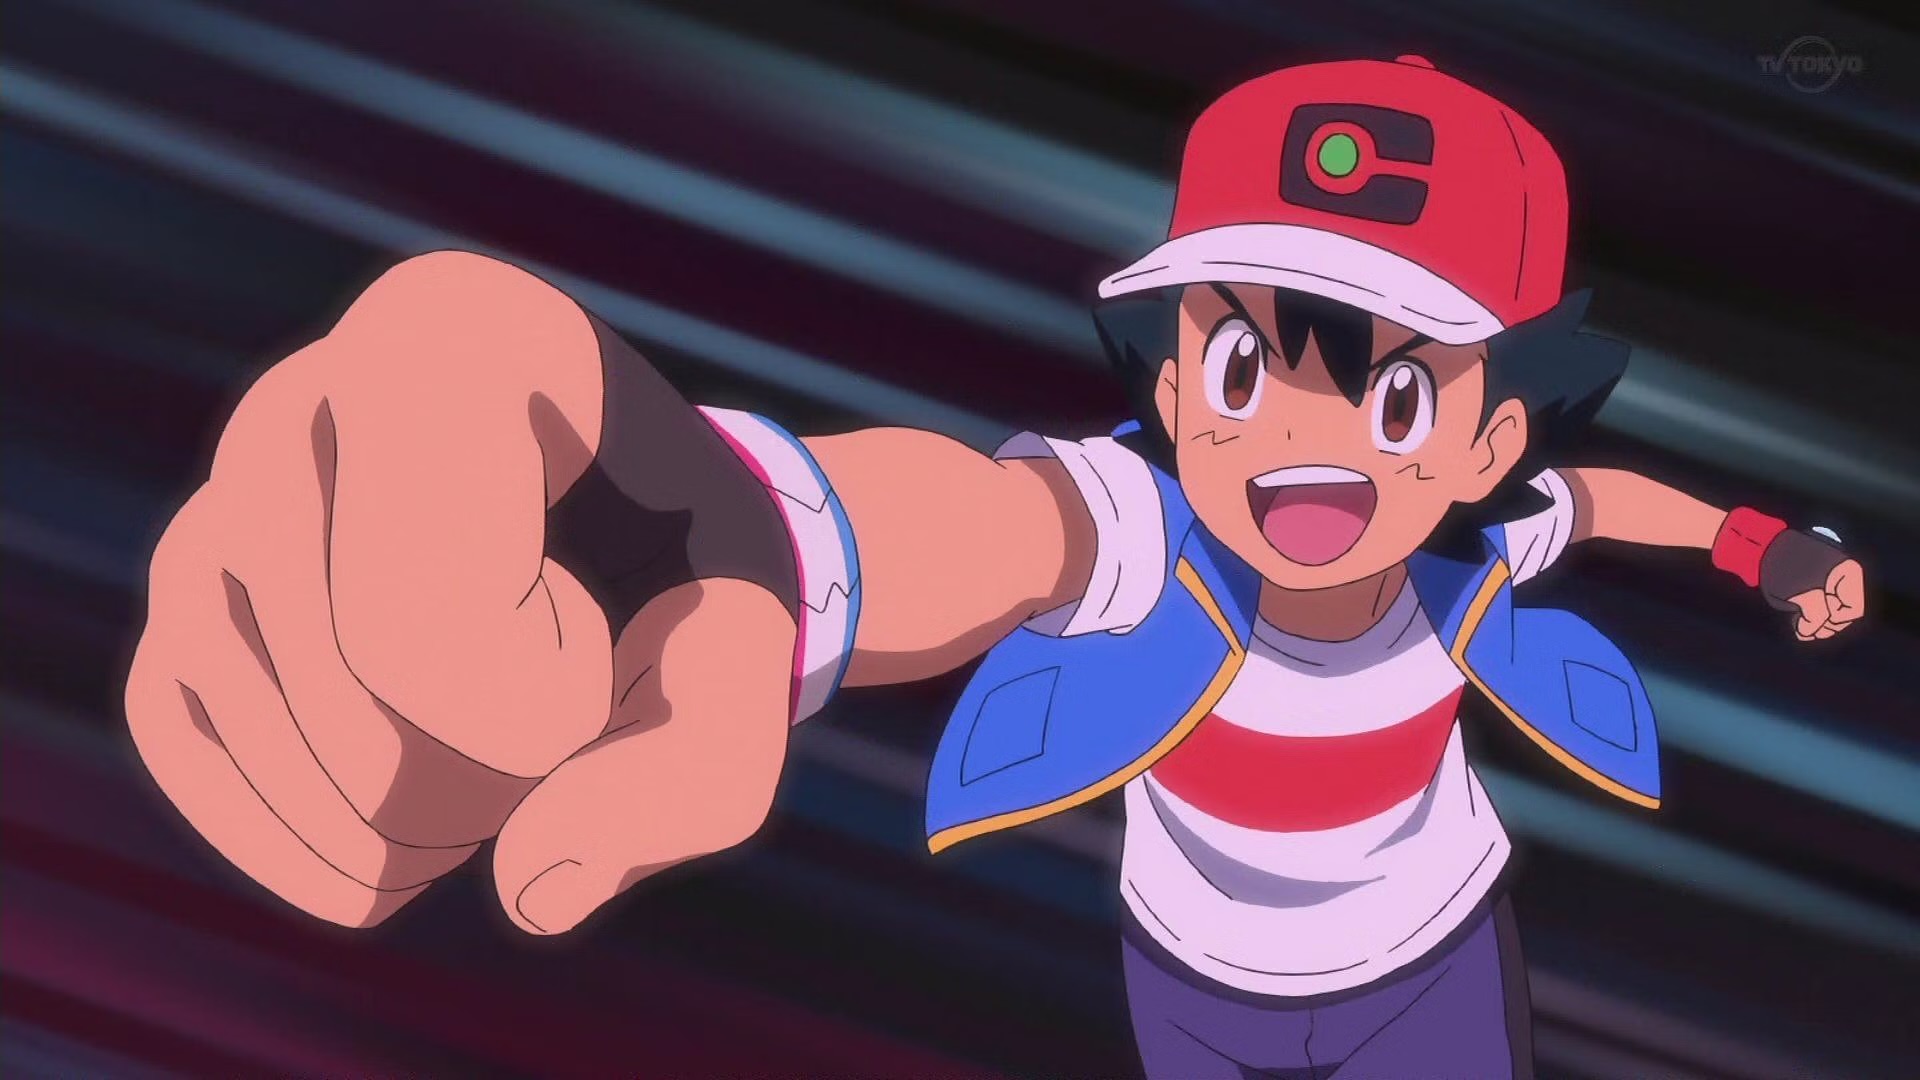 Ash Ketchum Clenched Fist Blank Meme Template